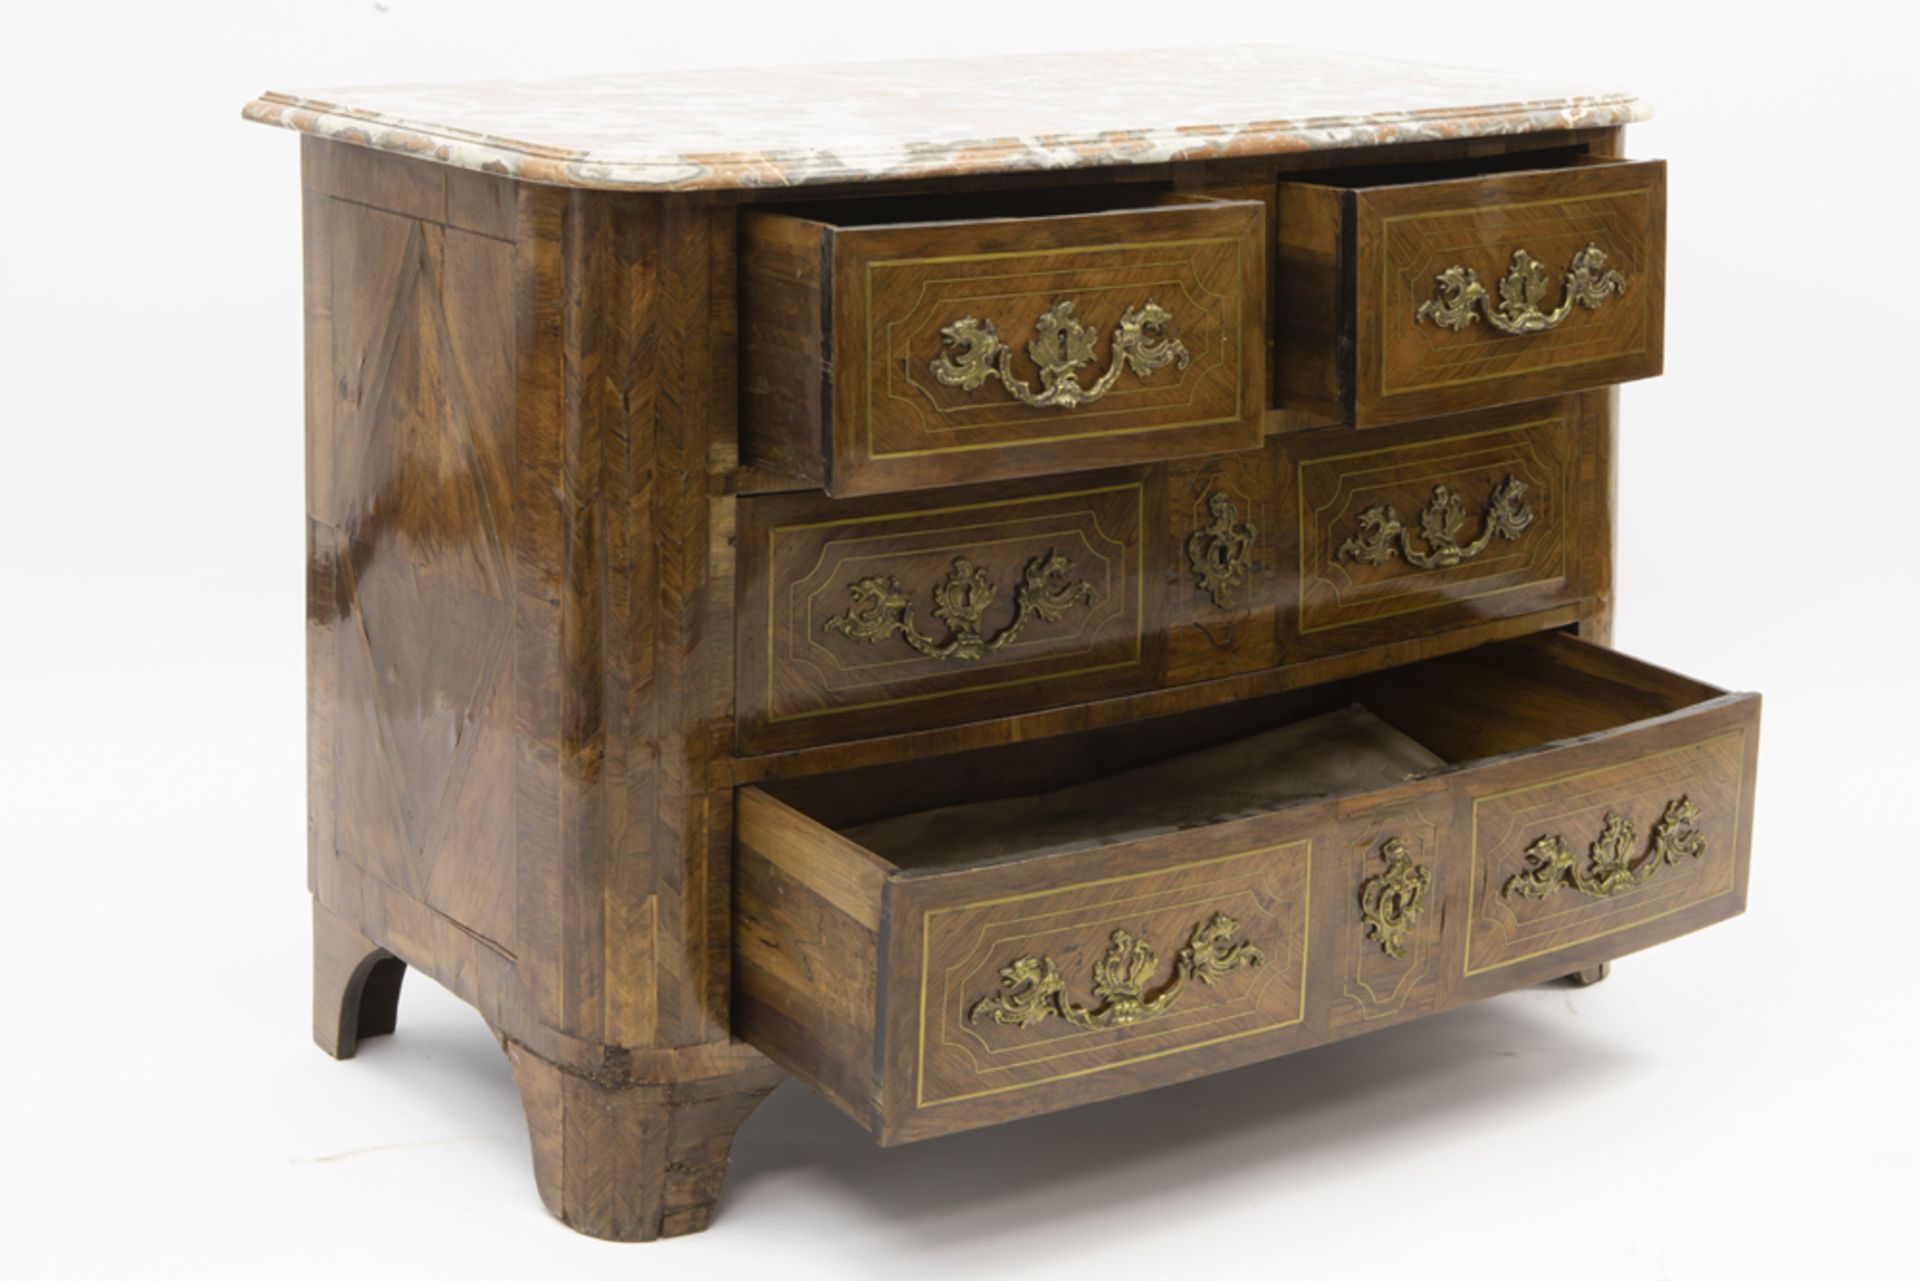 18th Cent. chest of drawers in parquetry with brass inlay, with four drawers with original mountings - Image 5 of 5